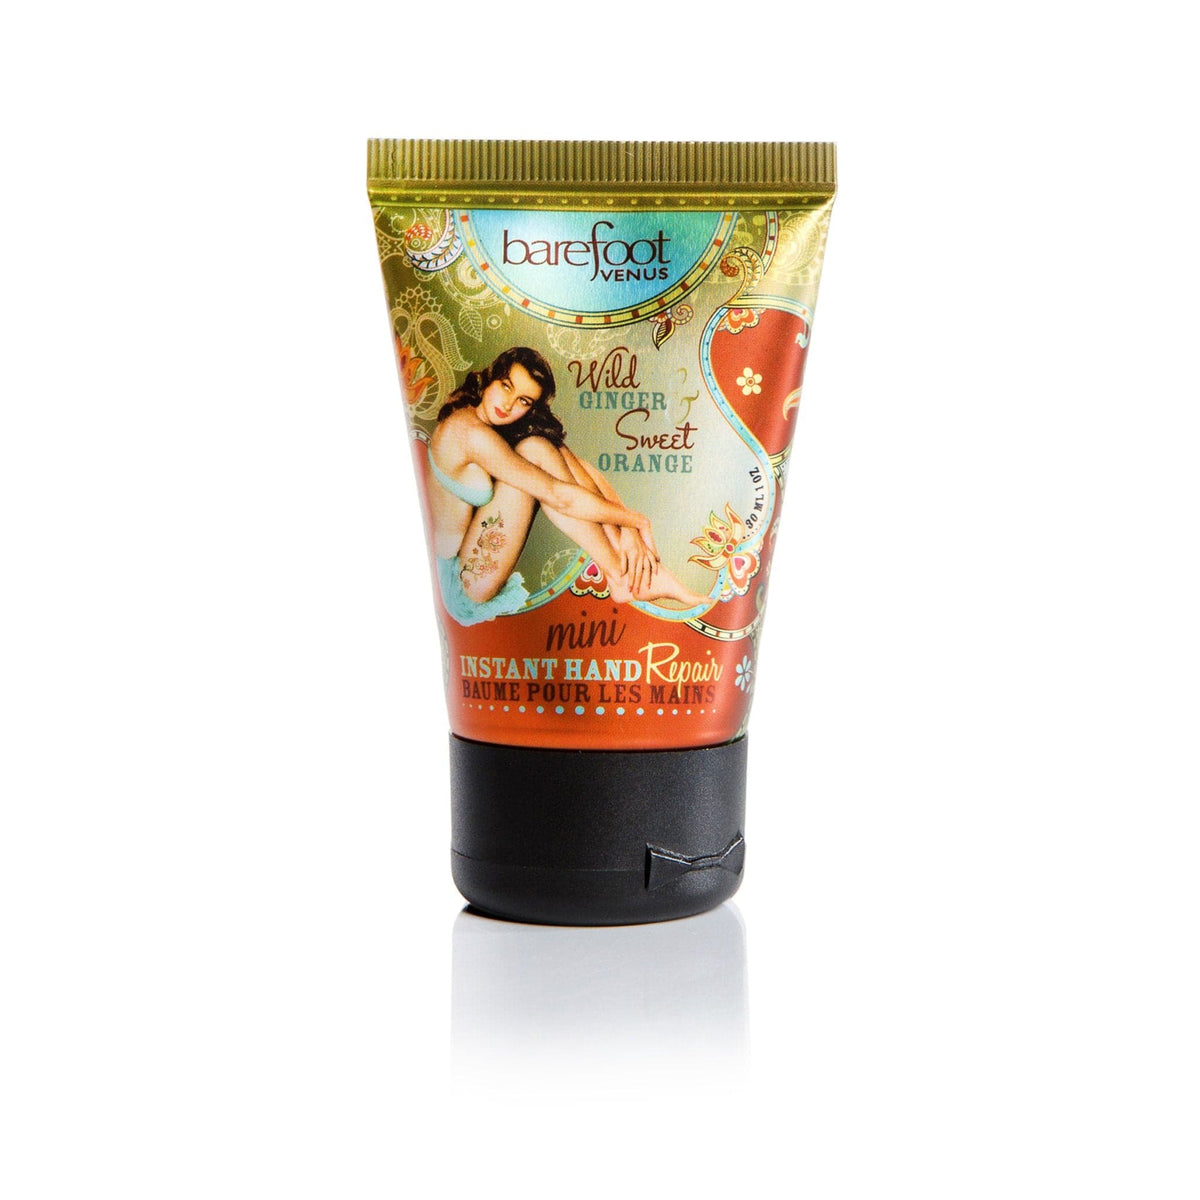 Wild Ginger &amp; Sweet Orange Instant Hand Repair ON-THE-GO. INTENSELY HYDRATING. Barefoot Venus